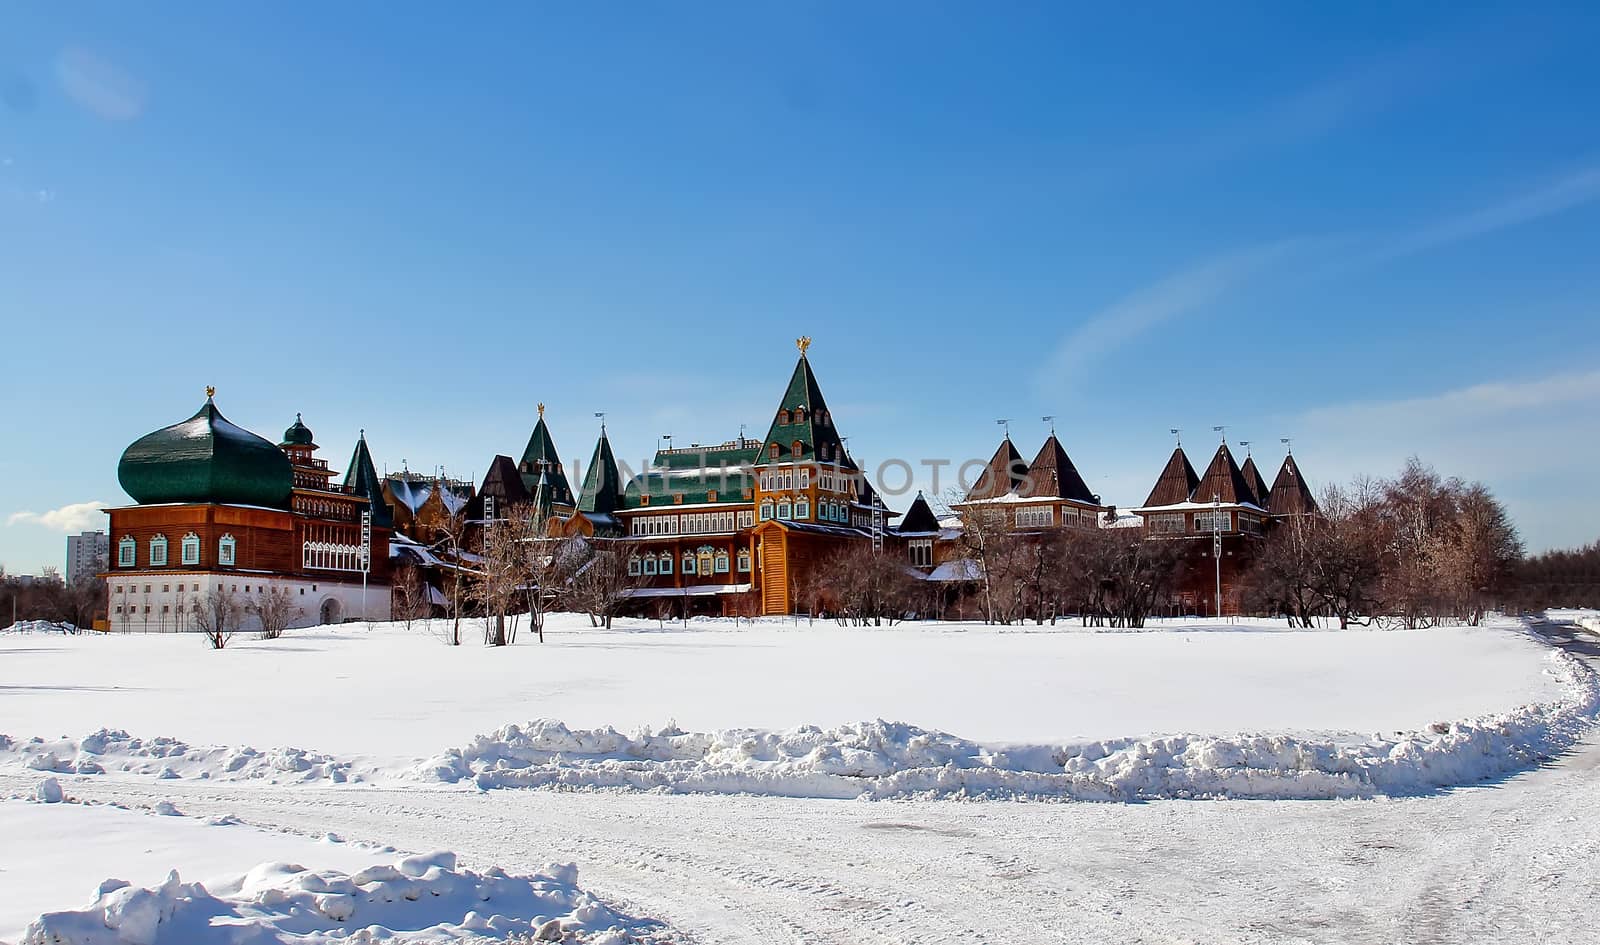 Wooden palace in Kolomenskoye. Winter landscape with snow on a background of blue sky with clouds in Kolomenskoye - a palace village, the former royal residence.